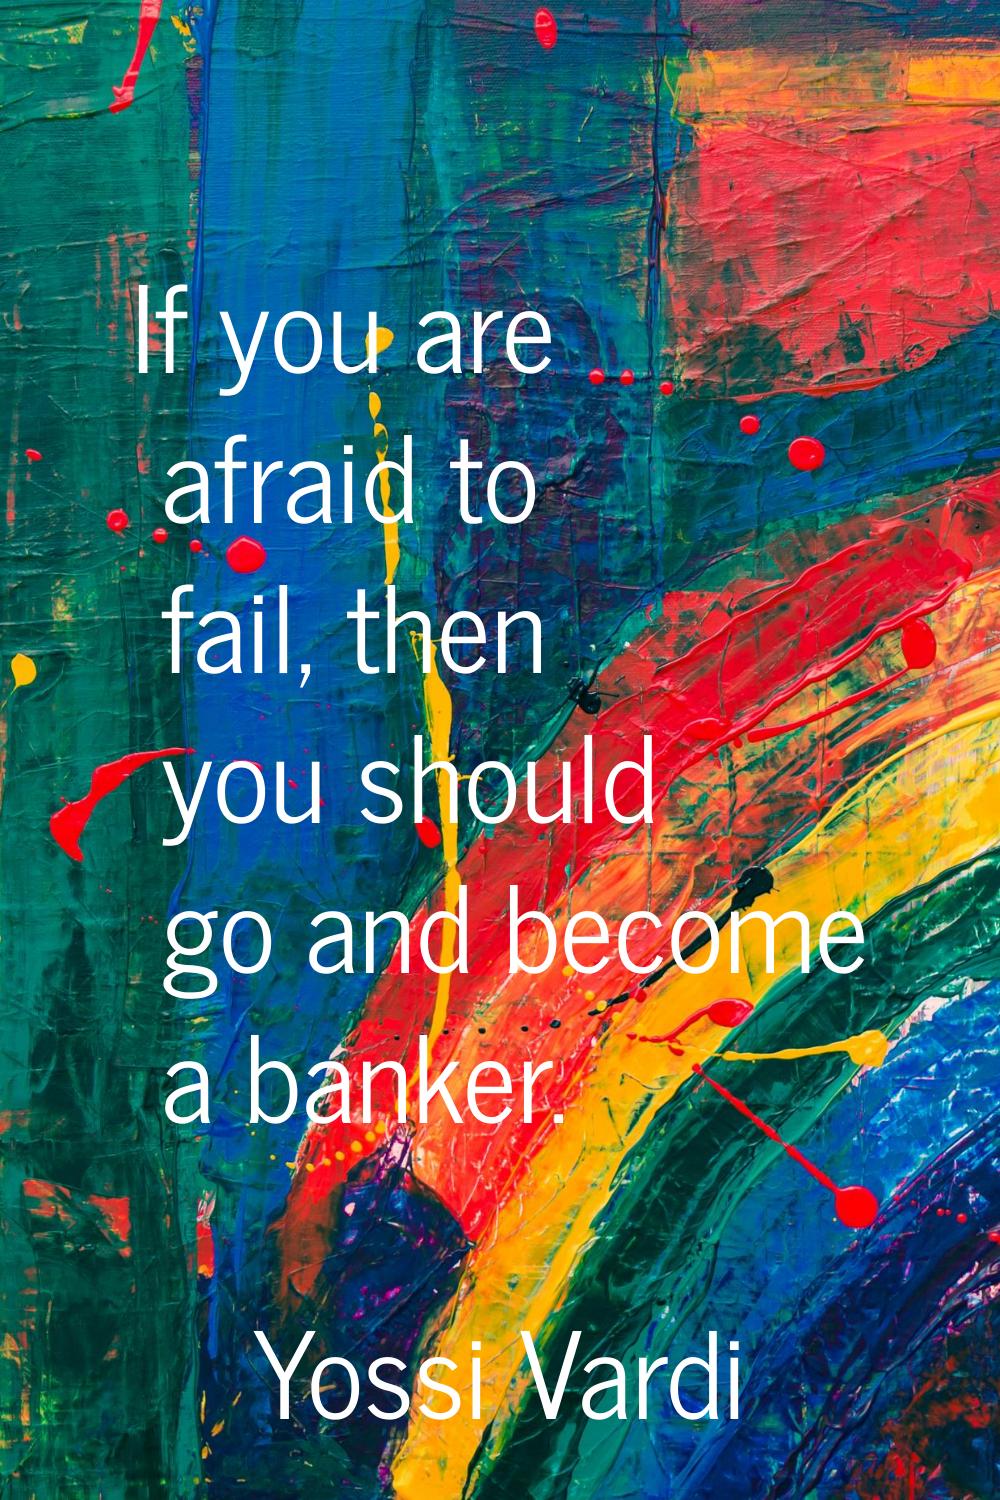 If you are afraid to fail, then you should go and become a banker.